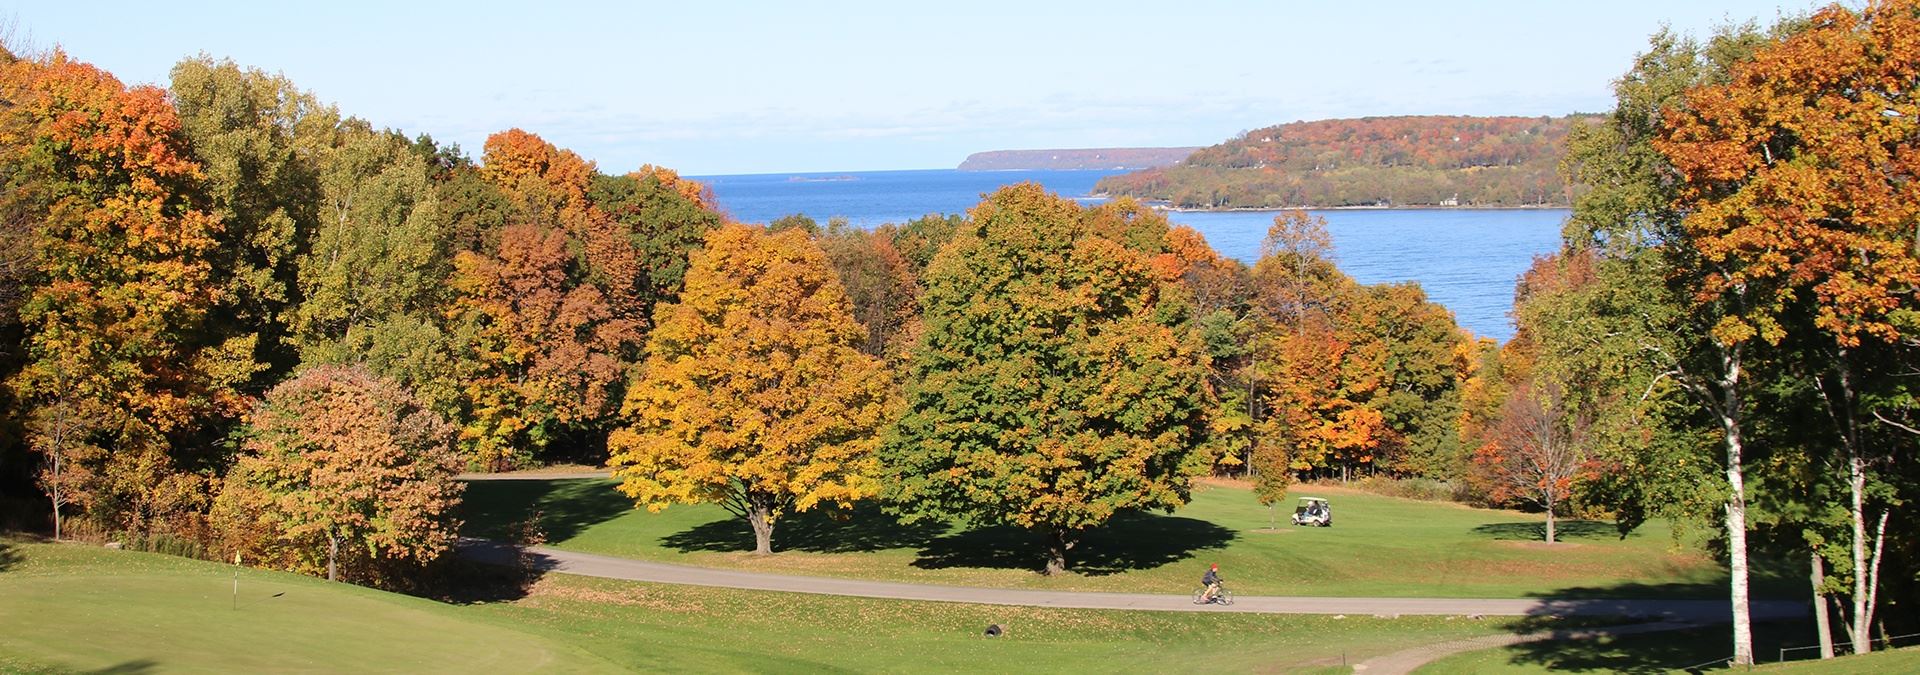 A golf course surrounded by colorful trees and the lake in the distance.